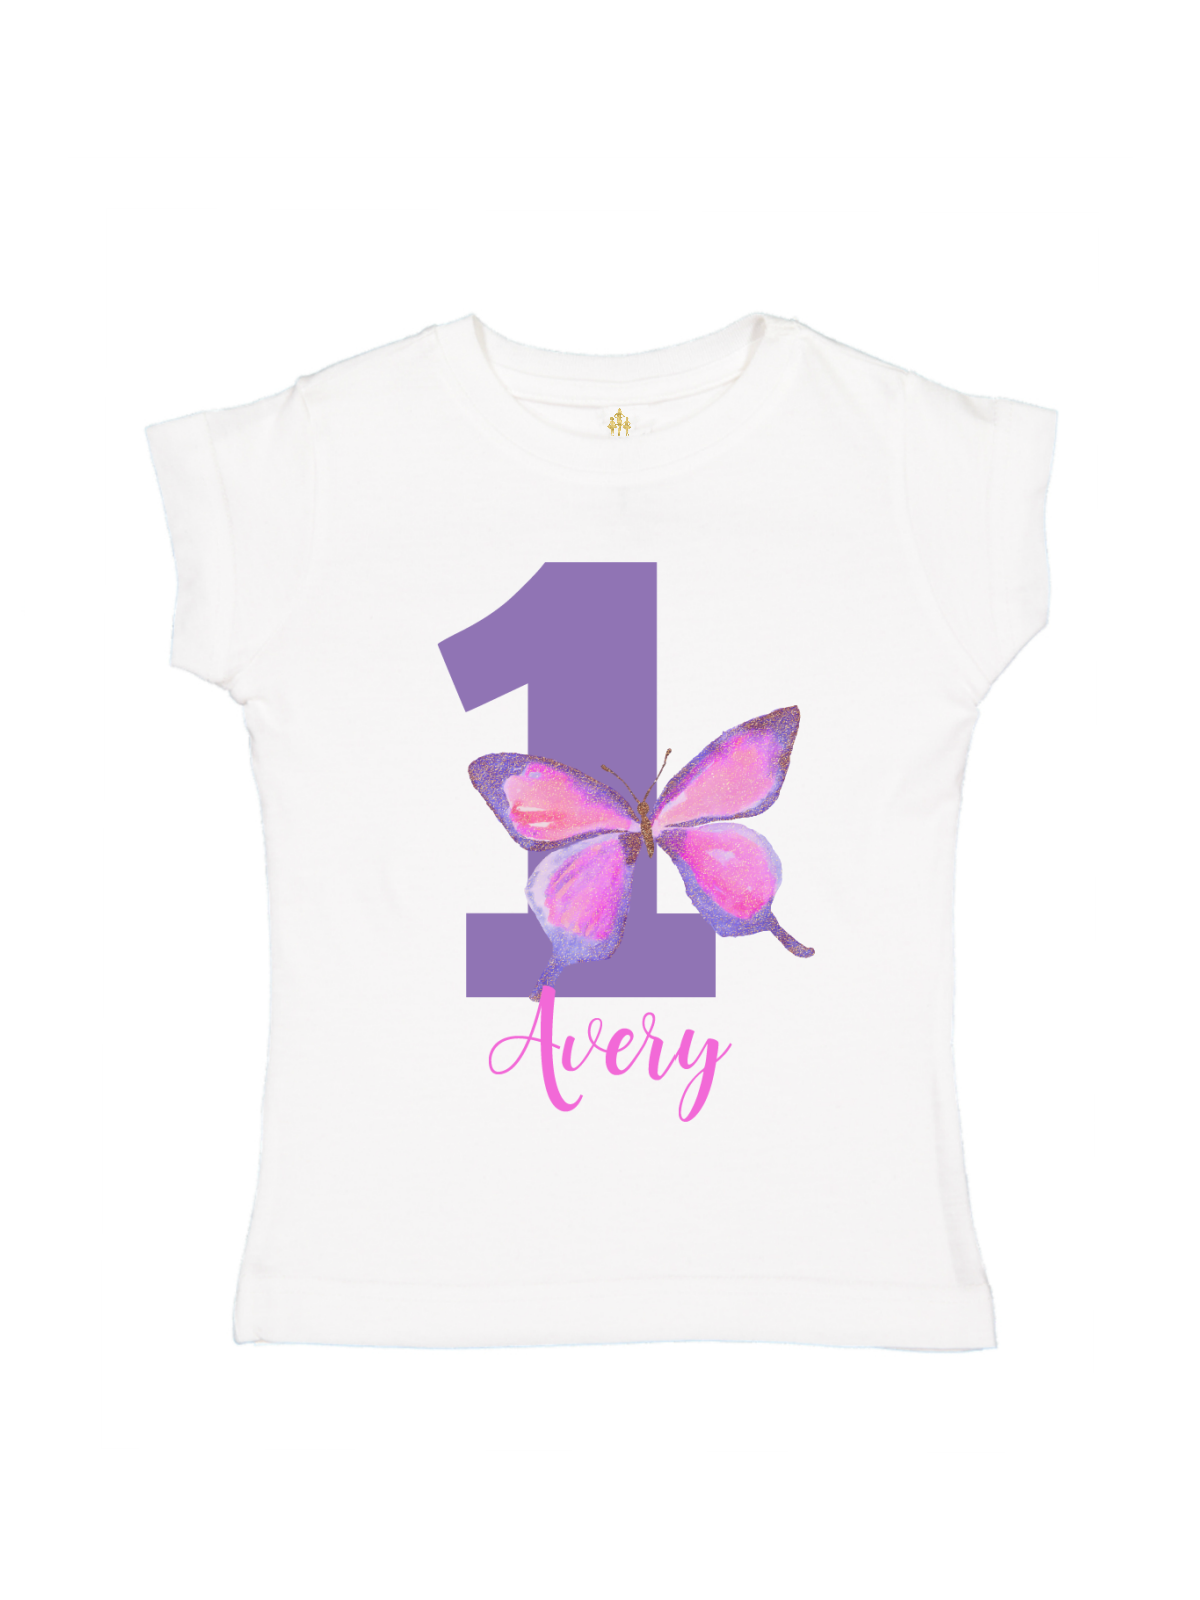 personalized kids butterfly birthday shirt